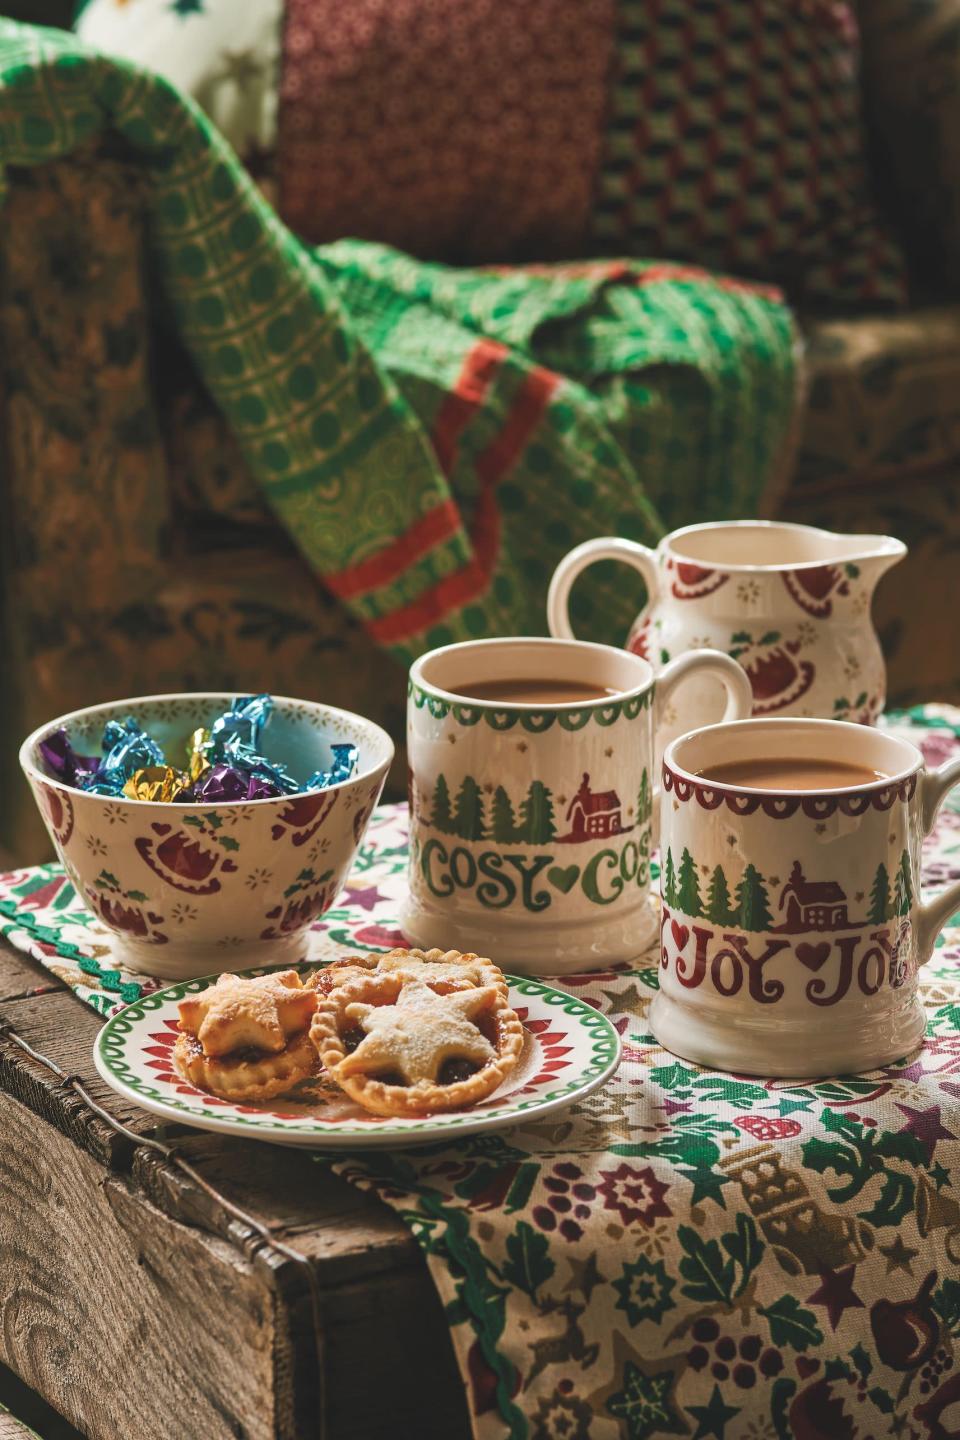 <p><a href="https://www.emmabridgewater.co.uk/" rel="nofollow noopener" target="_blank" data-ylk="slk:Emma Bridgewater" class="link ">Emma Bridgewater</a>'s 2022 Christmas collection has given us an excuse to get excited about the festive season. The famous British pottery brand, which is designed and manufactured in Stoke-on-Trent, has just released its Christmas 2022 collection – and homeware fans have plenty of pieces to add to their <a href="https://www.countryliving.com/uk/homes-interiors/interiors/g29470409/eco-friendly-christmas-crackers/" rel="nofollow noopener" target="_blank" data-ylk="slk:Christmas" class="link ">Christmas</a> lists.</p><p>From present sacks to festive mugs, the Emma Bridgewater Christmas collection is available to buy now... just in time for our festive shopping! </p><p><a class="link " href="https://www.emmabridgewater.co.uk/collections/all-christmas" rel="nofollow noopener" target="_blank" data-ylk="slk:BROWSE FULL COLLECTION">BROWSE FULL COLLECTION</a> </p>